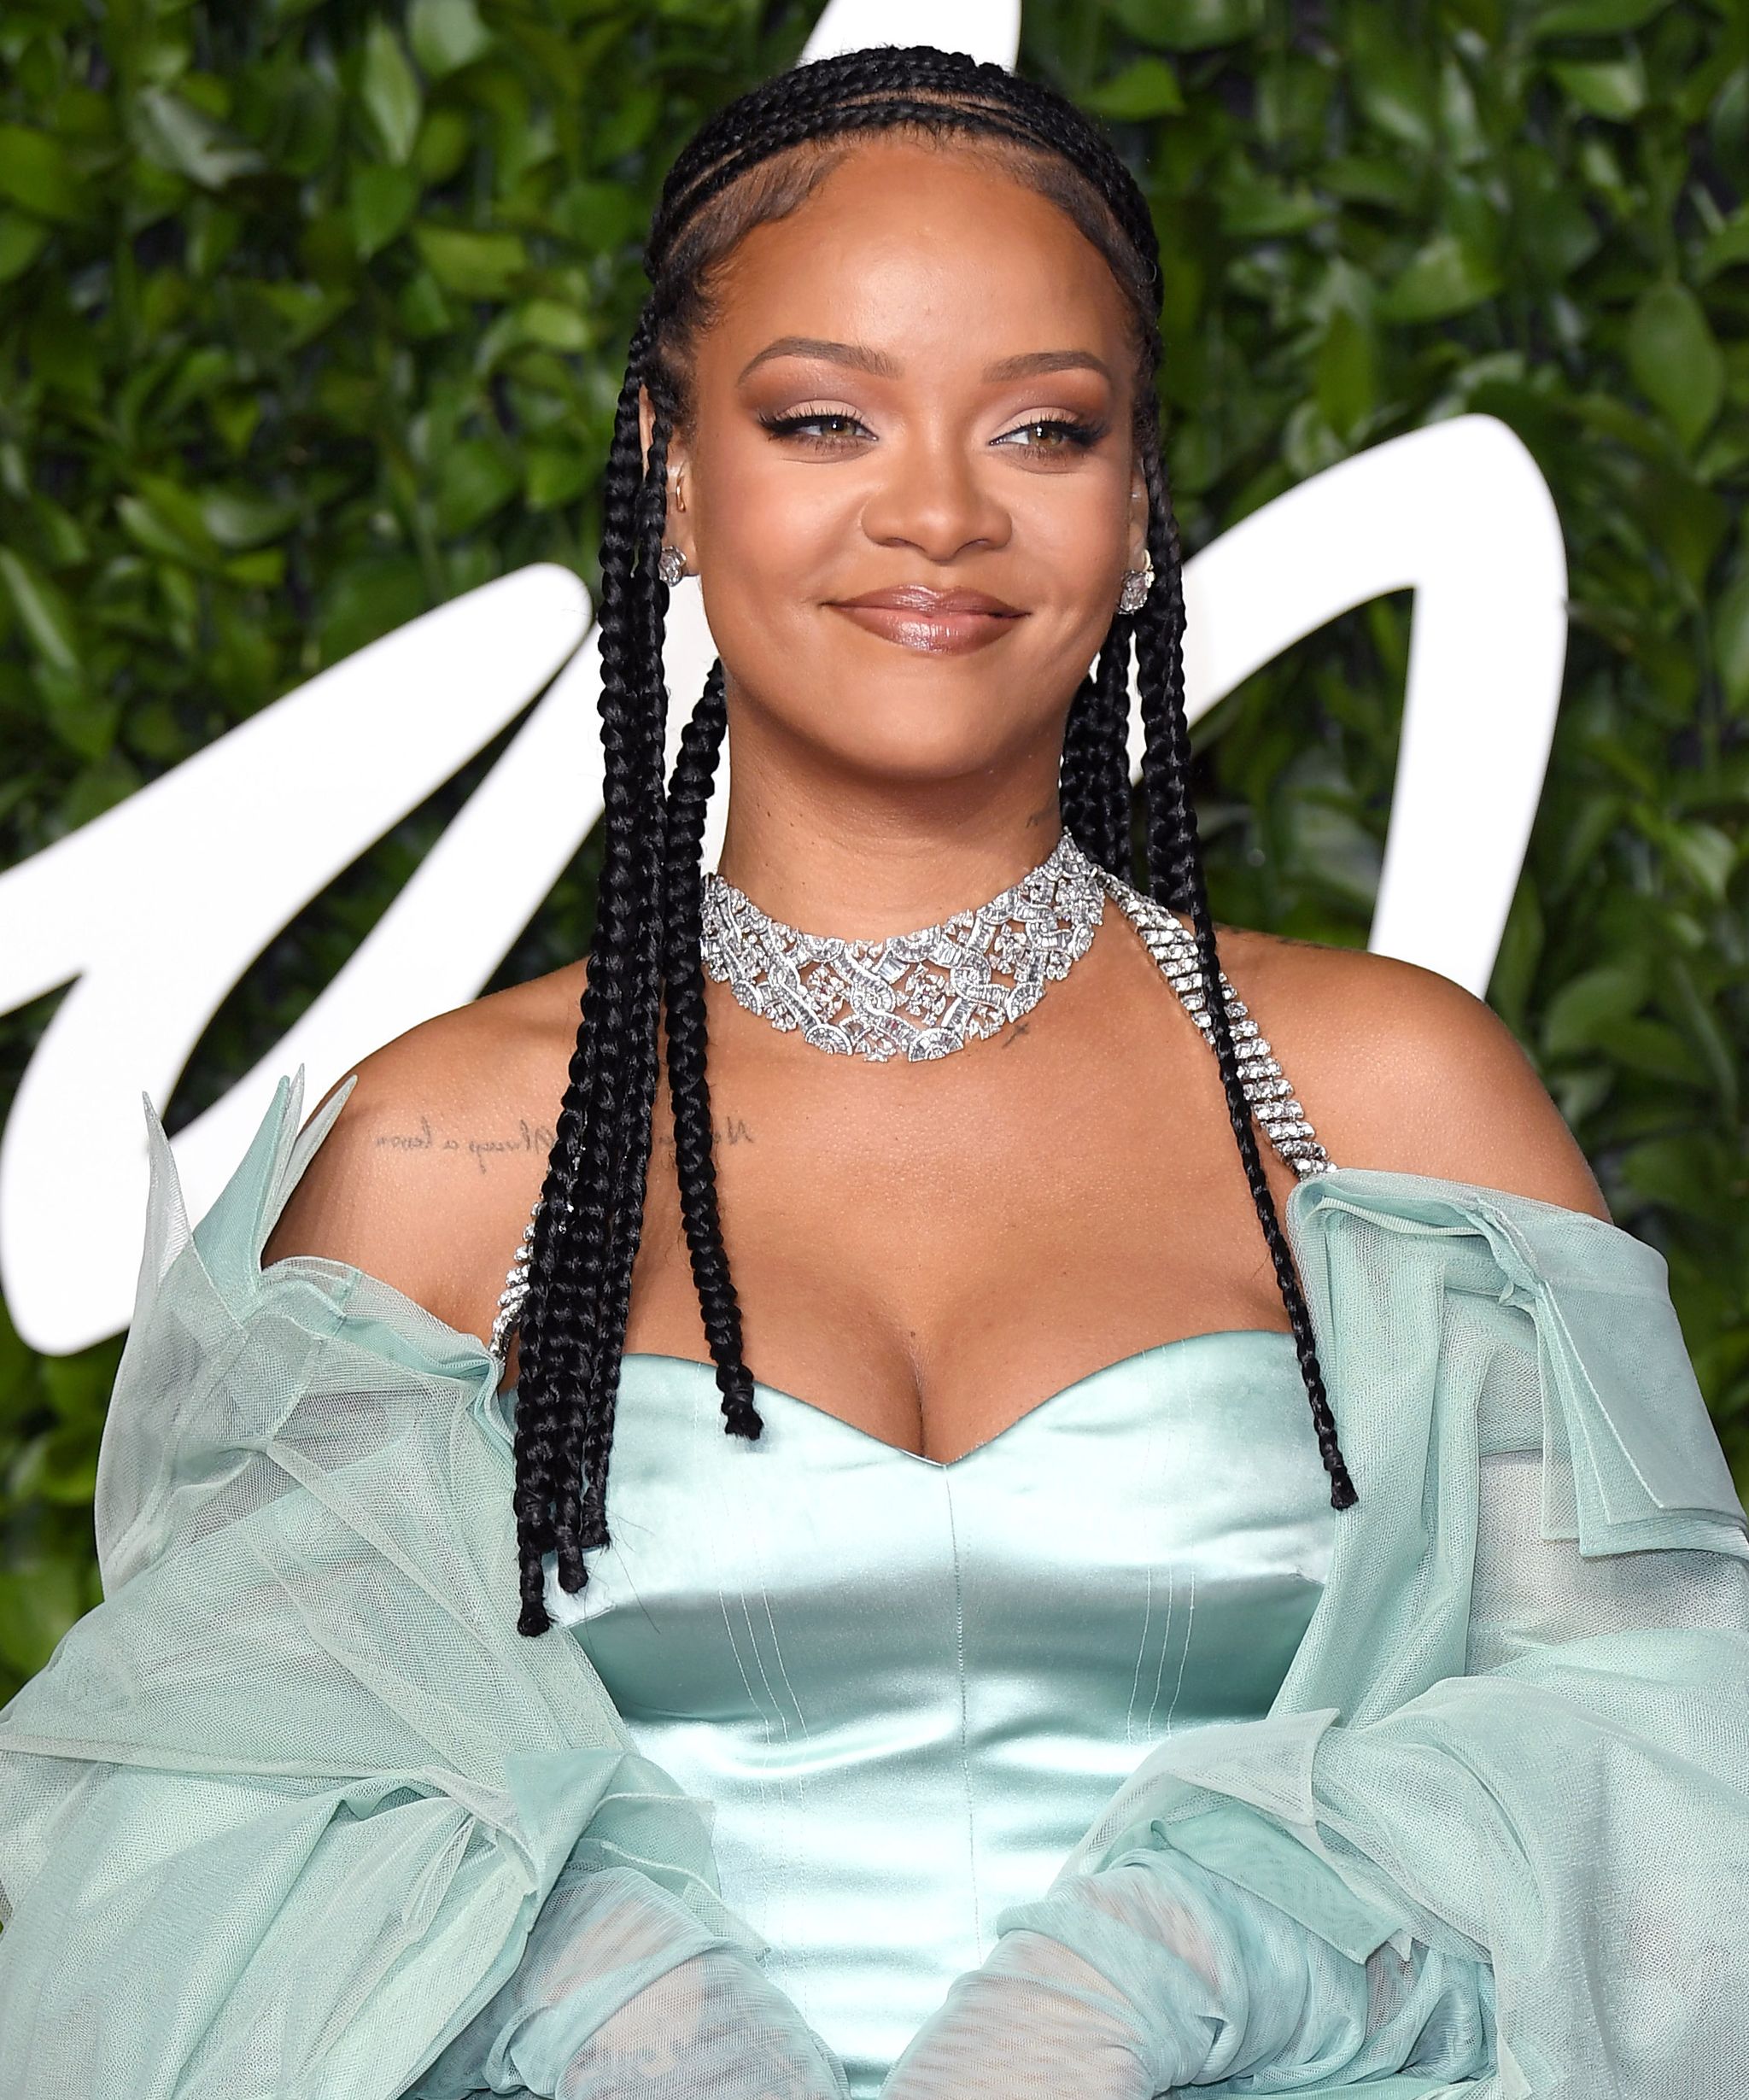 london, england   december 02 rihanna attends the fashion awards 2019 at the royal albert hall on december 02, 2019 in london, england photo by karwai tangwireimage